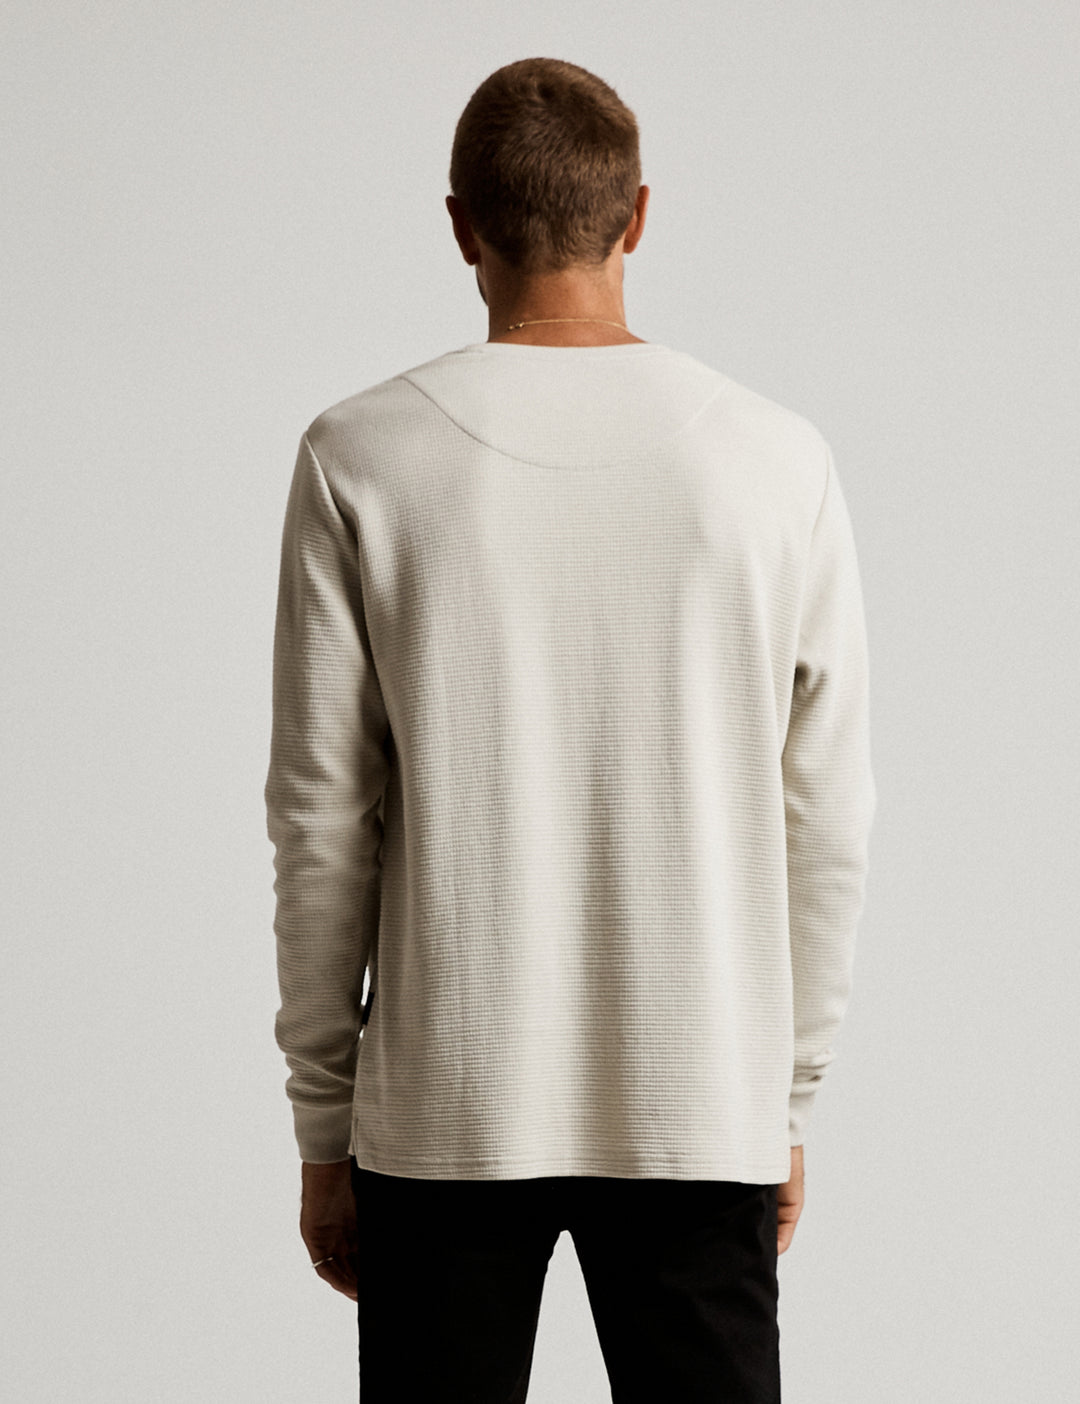 Mr Simple - Waffle Long Sleeve Tee in Vintage White | Buster McGee